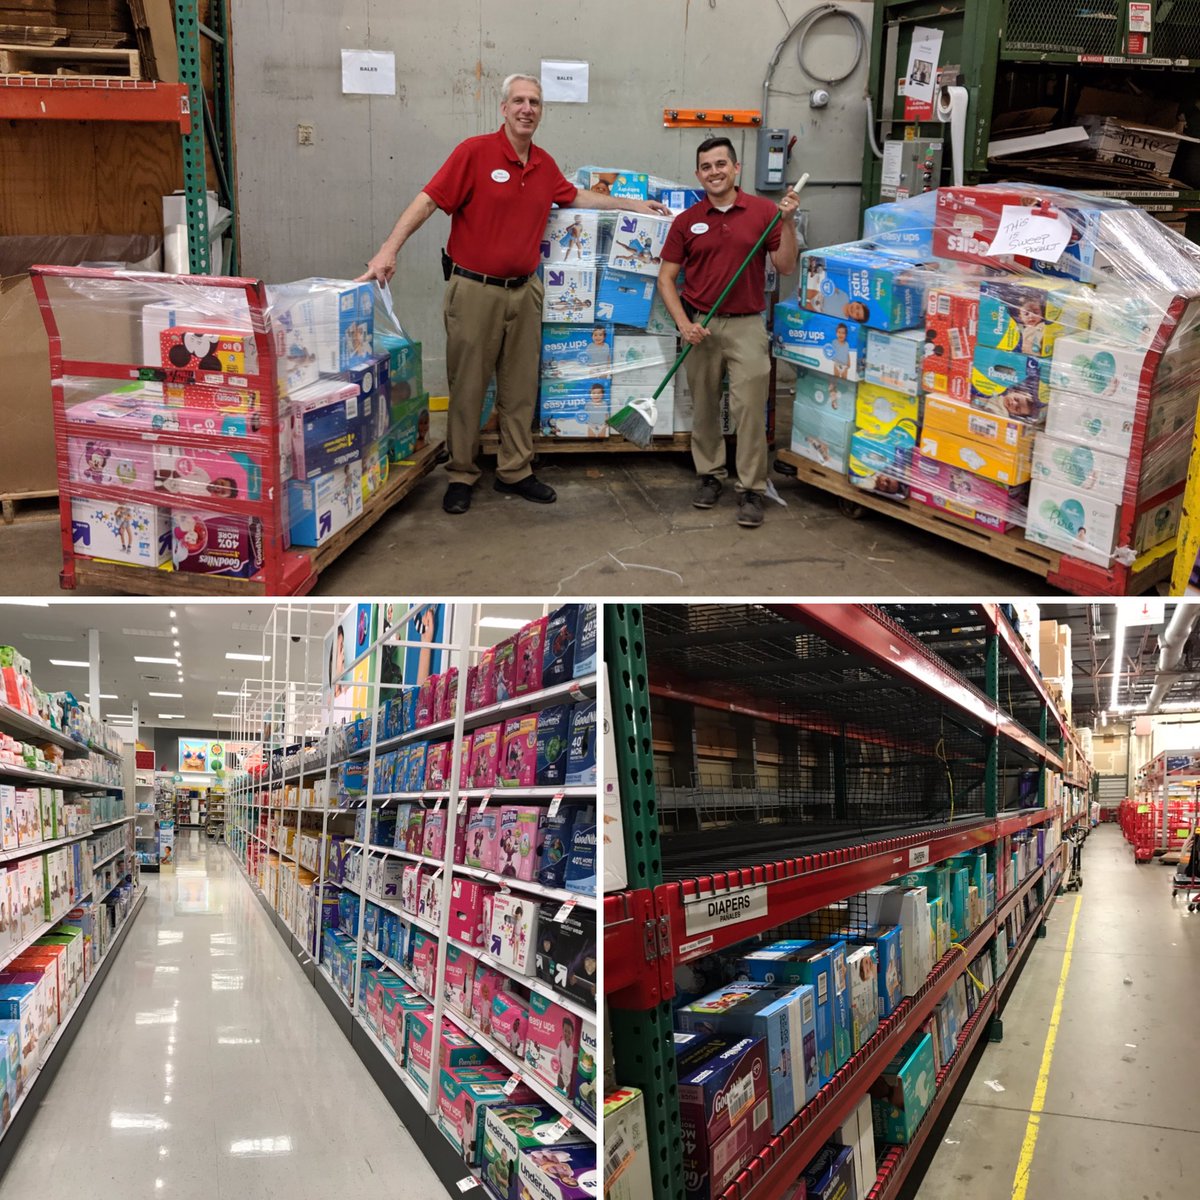 GM Doug & Department Owner Fidelina taking care of our baby guest and driving sales! Smart fill ✅ BRLA ✅ Sweep ✅ 🤑 ✅ ⁦@Jeff_DeMoss⁩ ⁦@ContrucciJoe⁩ ⁦@A_Leigh_⁩ ⁦@MikeQuinn75⁩